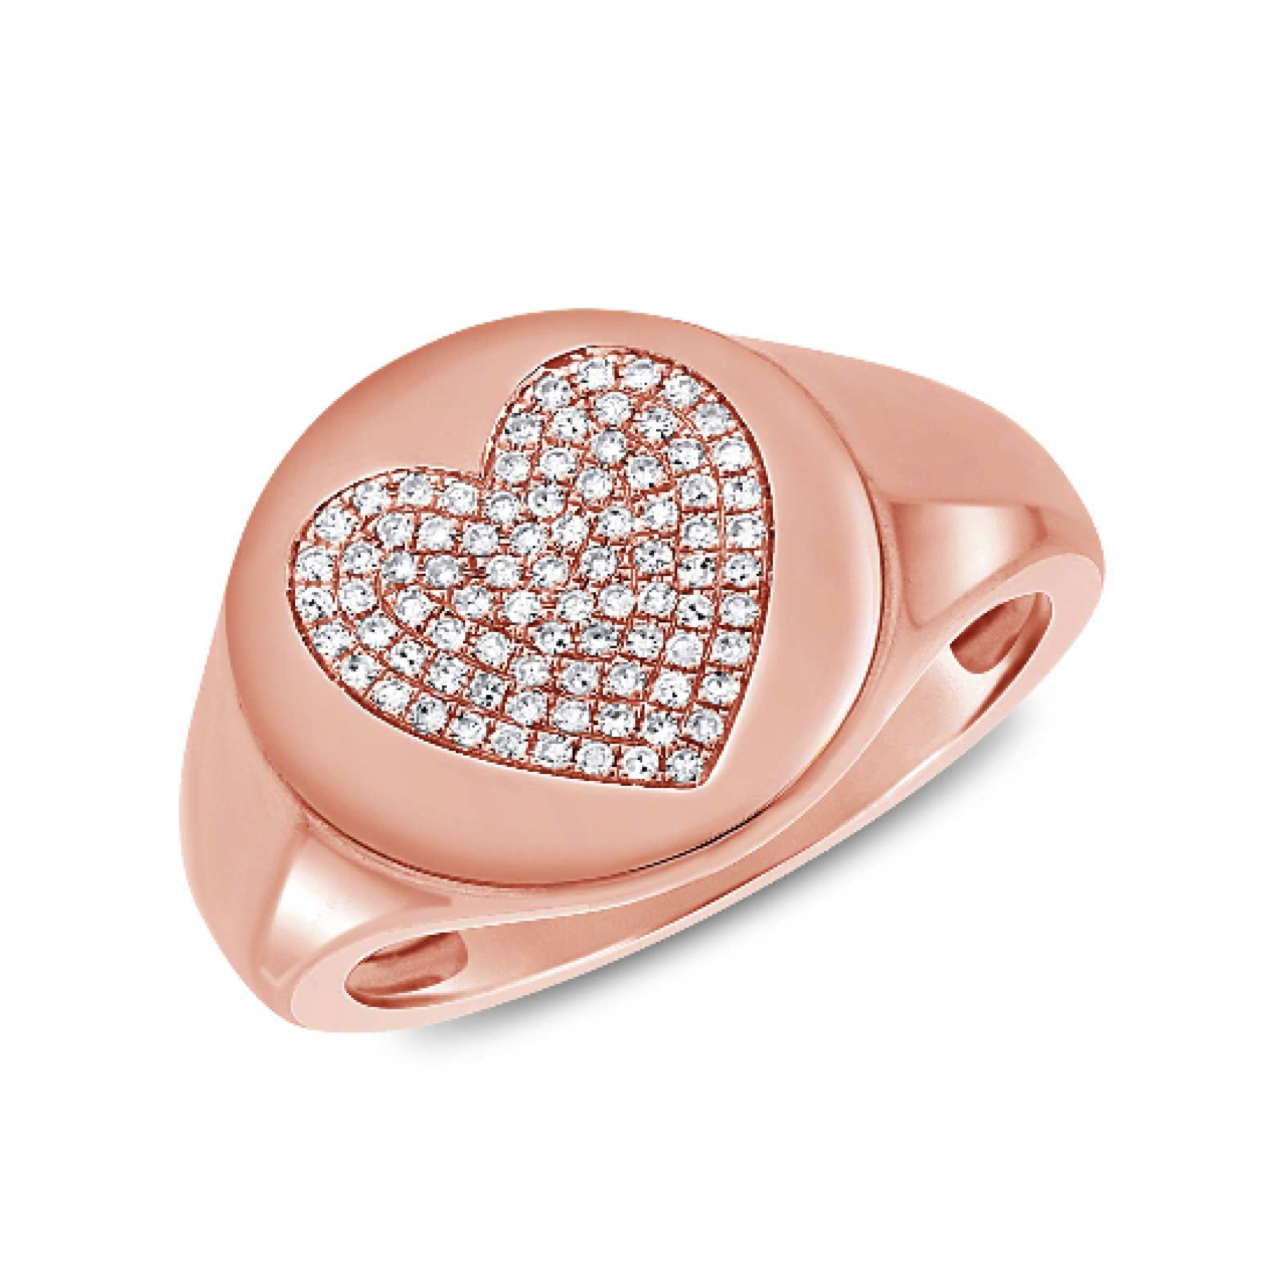 Pave Heart Signet Ring